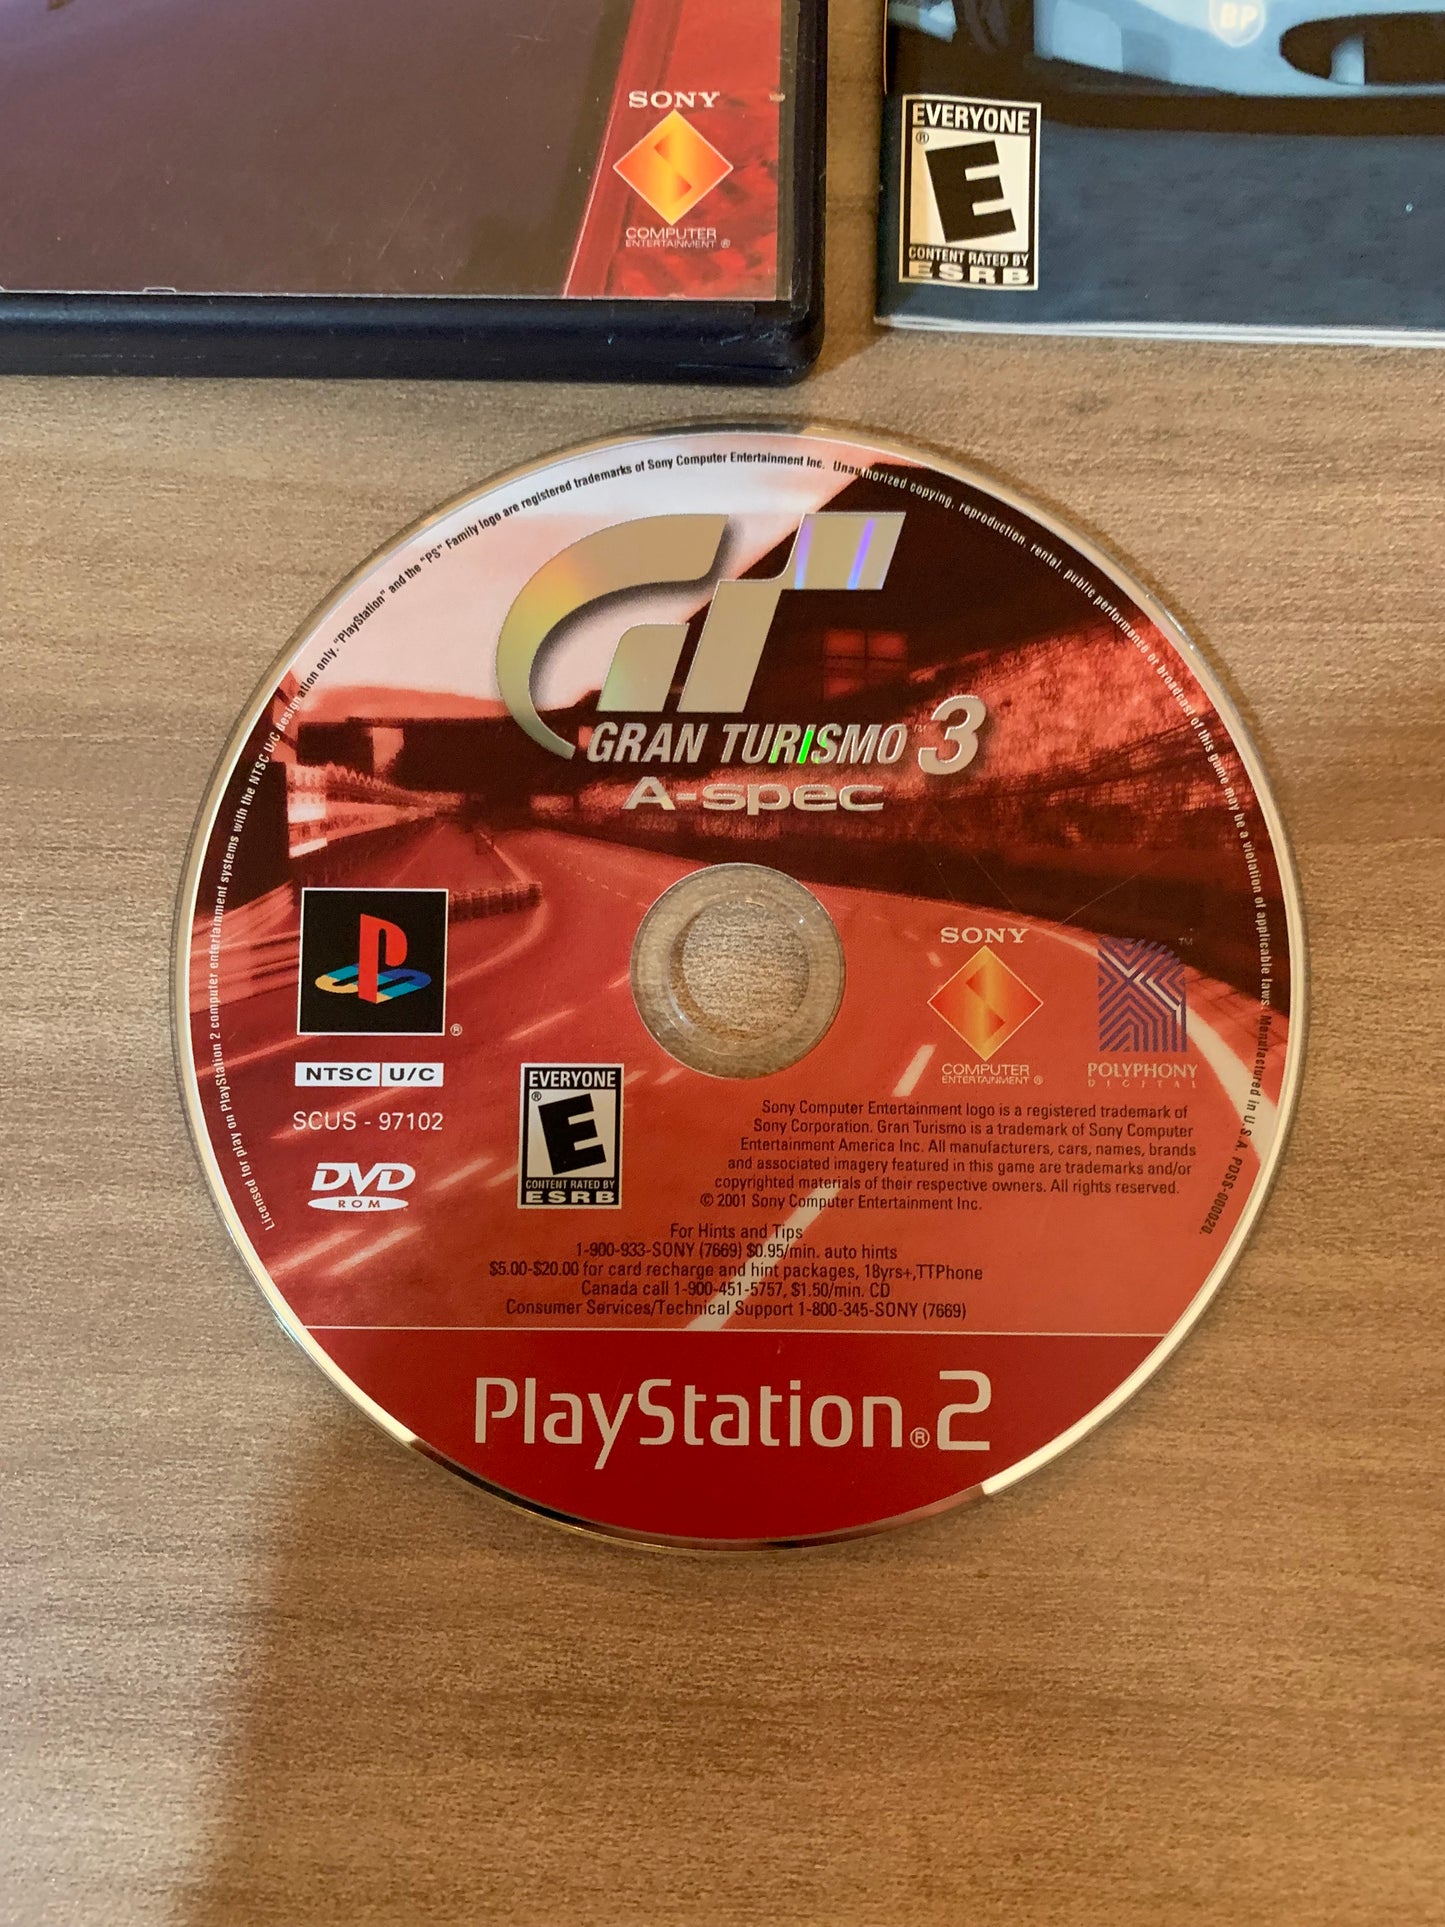 SONY PLAYSTATiON 2 [PS2] | GRAN TURiSMO 3 GT3 A-SPEC | GREATEST HiTS